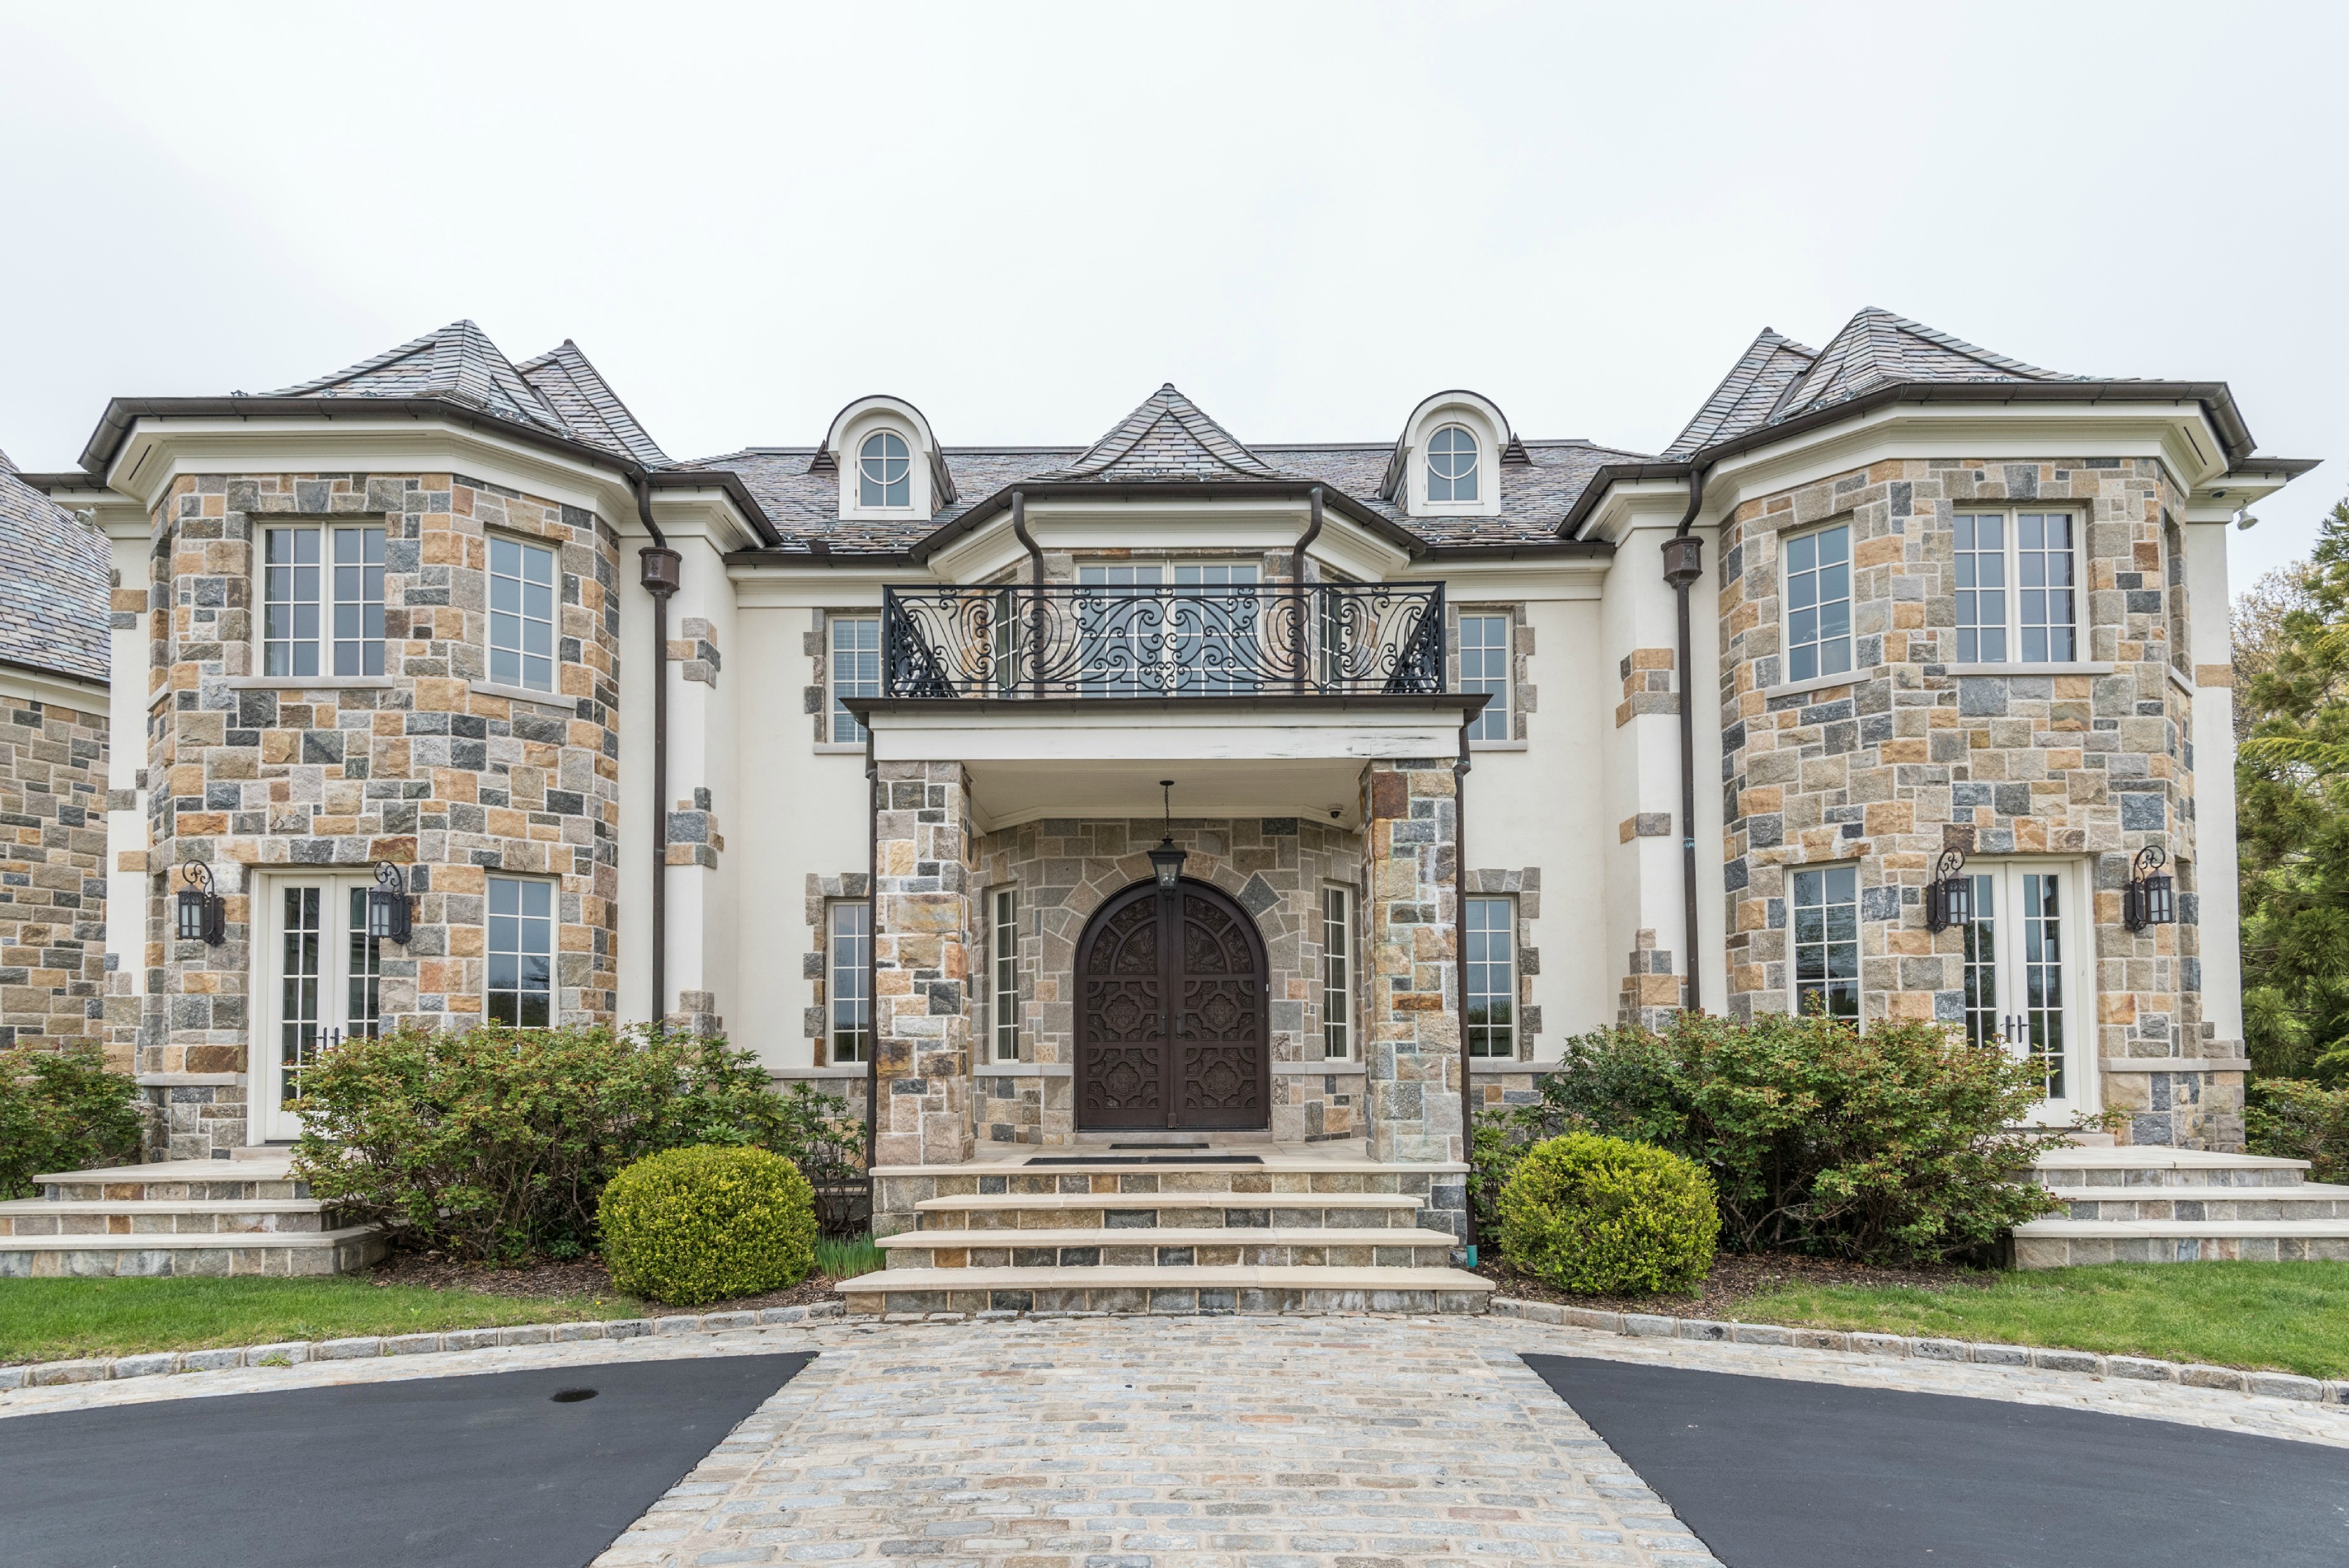 As Seen in Long Island Business News:  5 Dupont Court in Brookville was the highest home sale in Nassau County for 2017